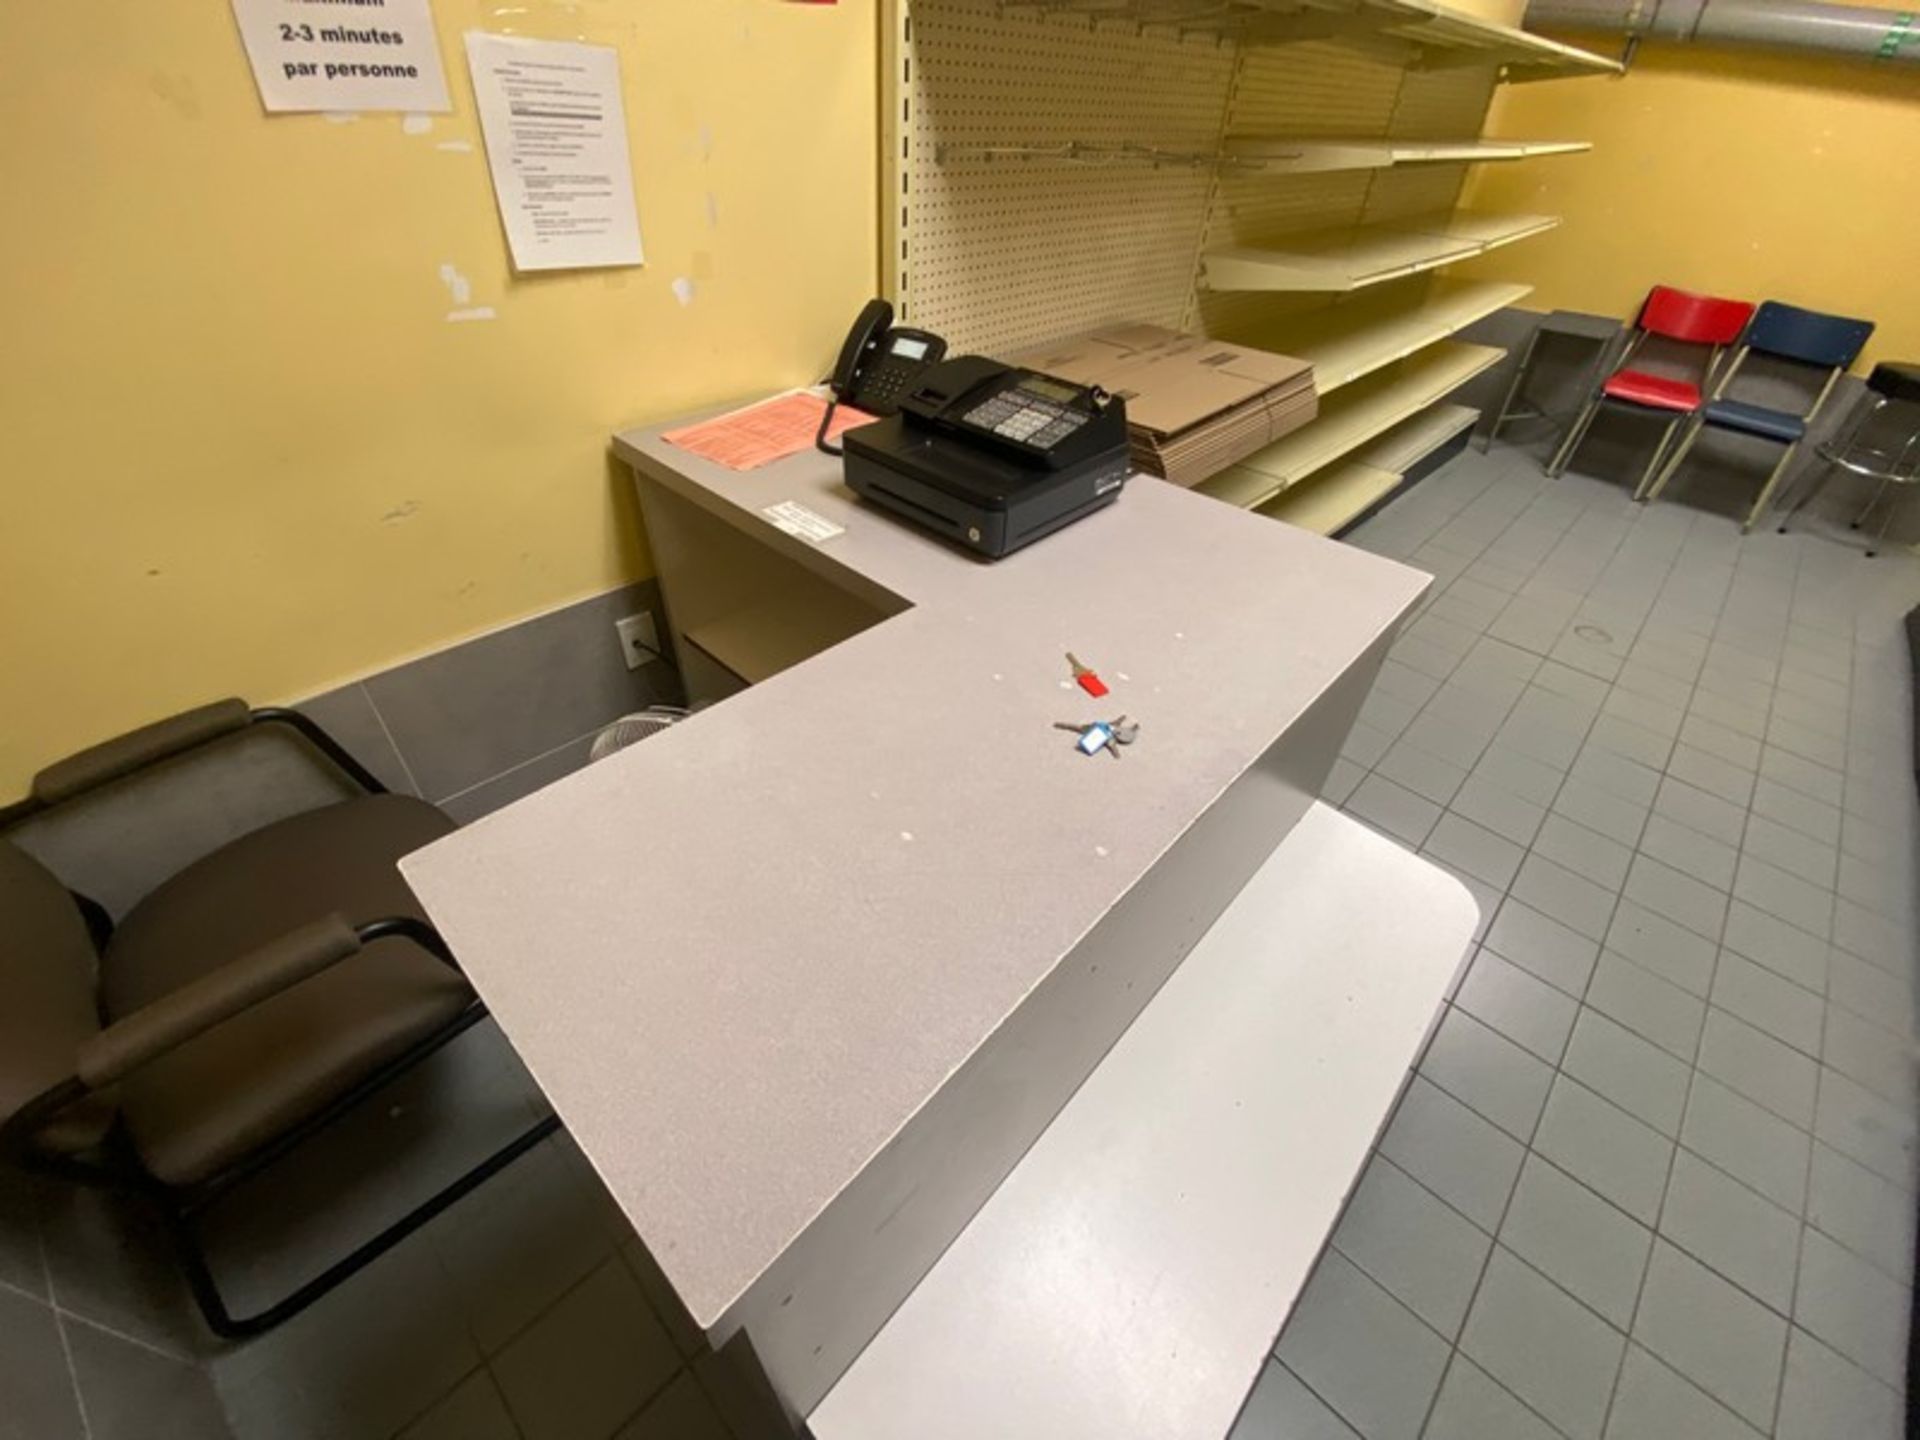 Contents of Employee Store, Includes Shelving, Cash Register, Counter Top (LOCATED IN SAINT-LAMBERT, - Image 3 of 4